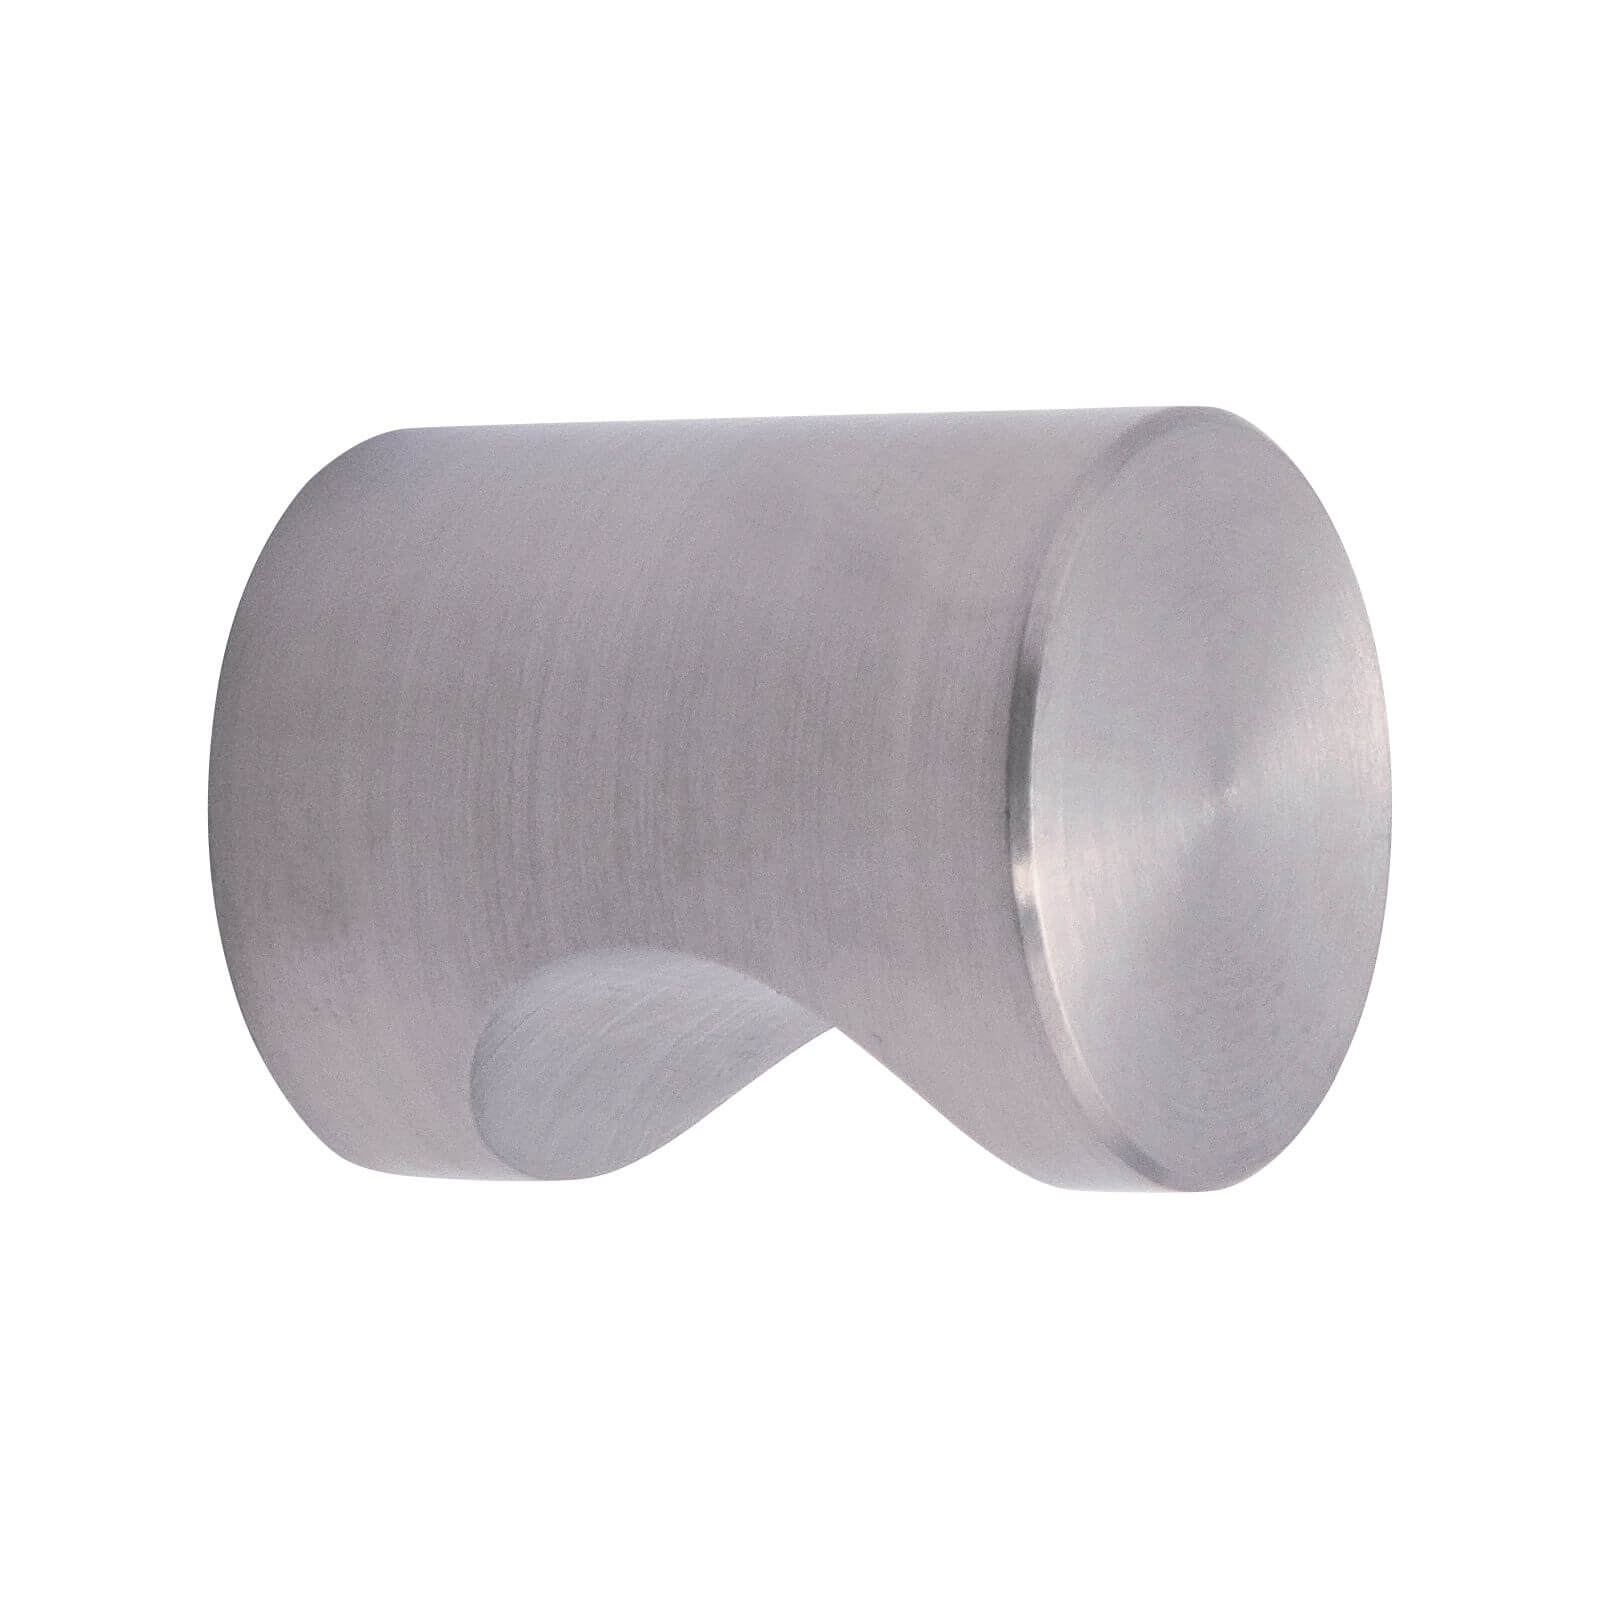 Notched Door Pull - Large - Stainless Steel